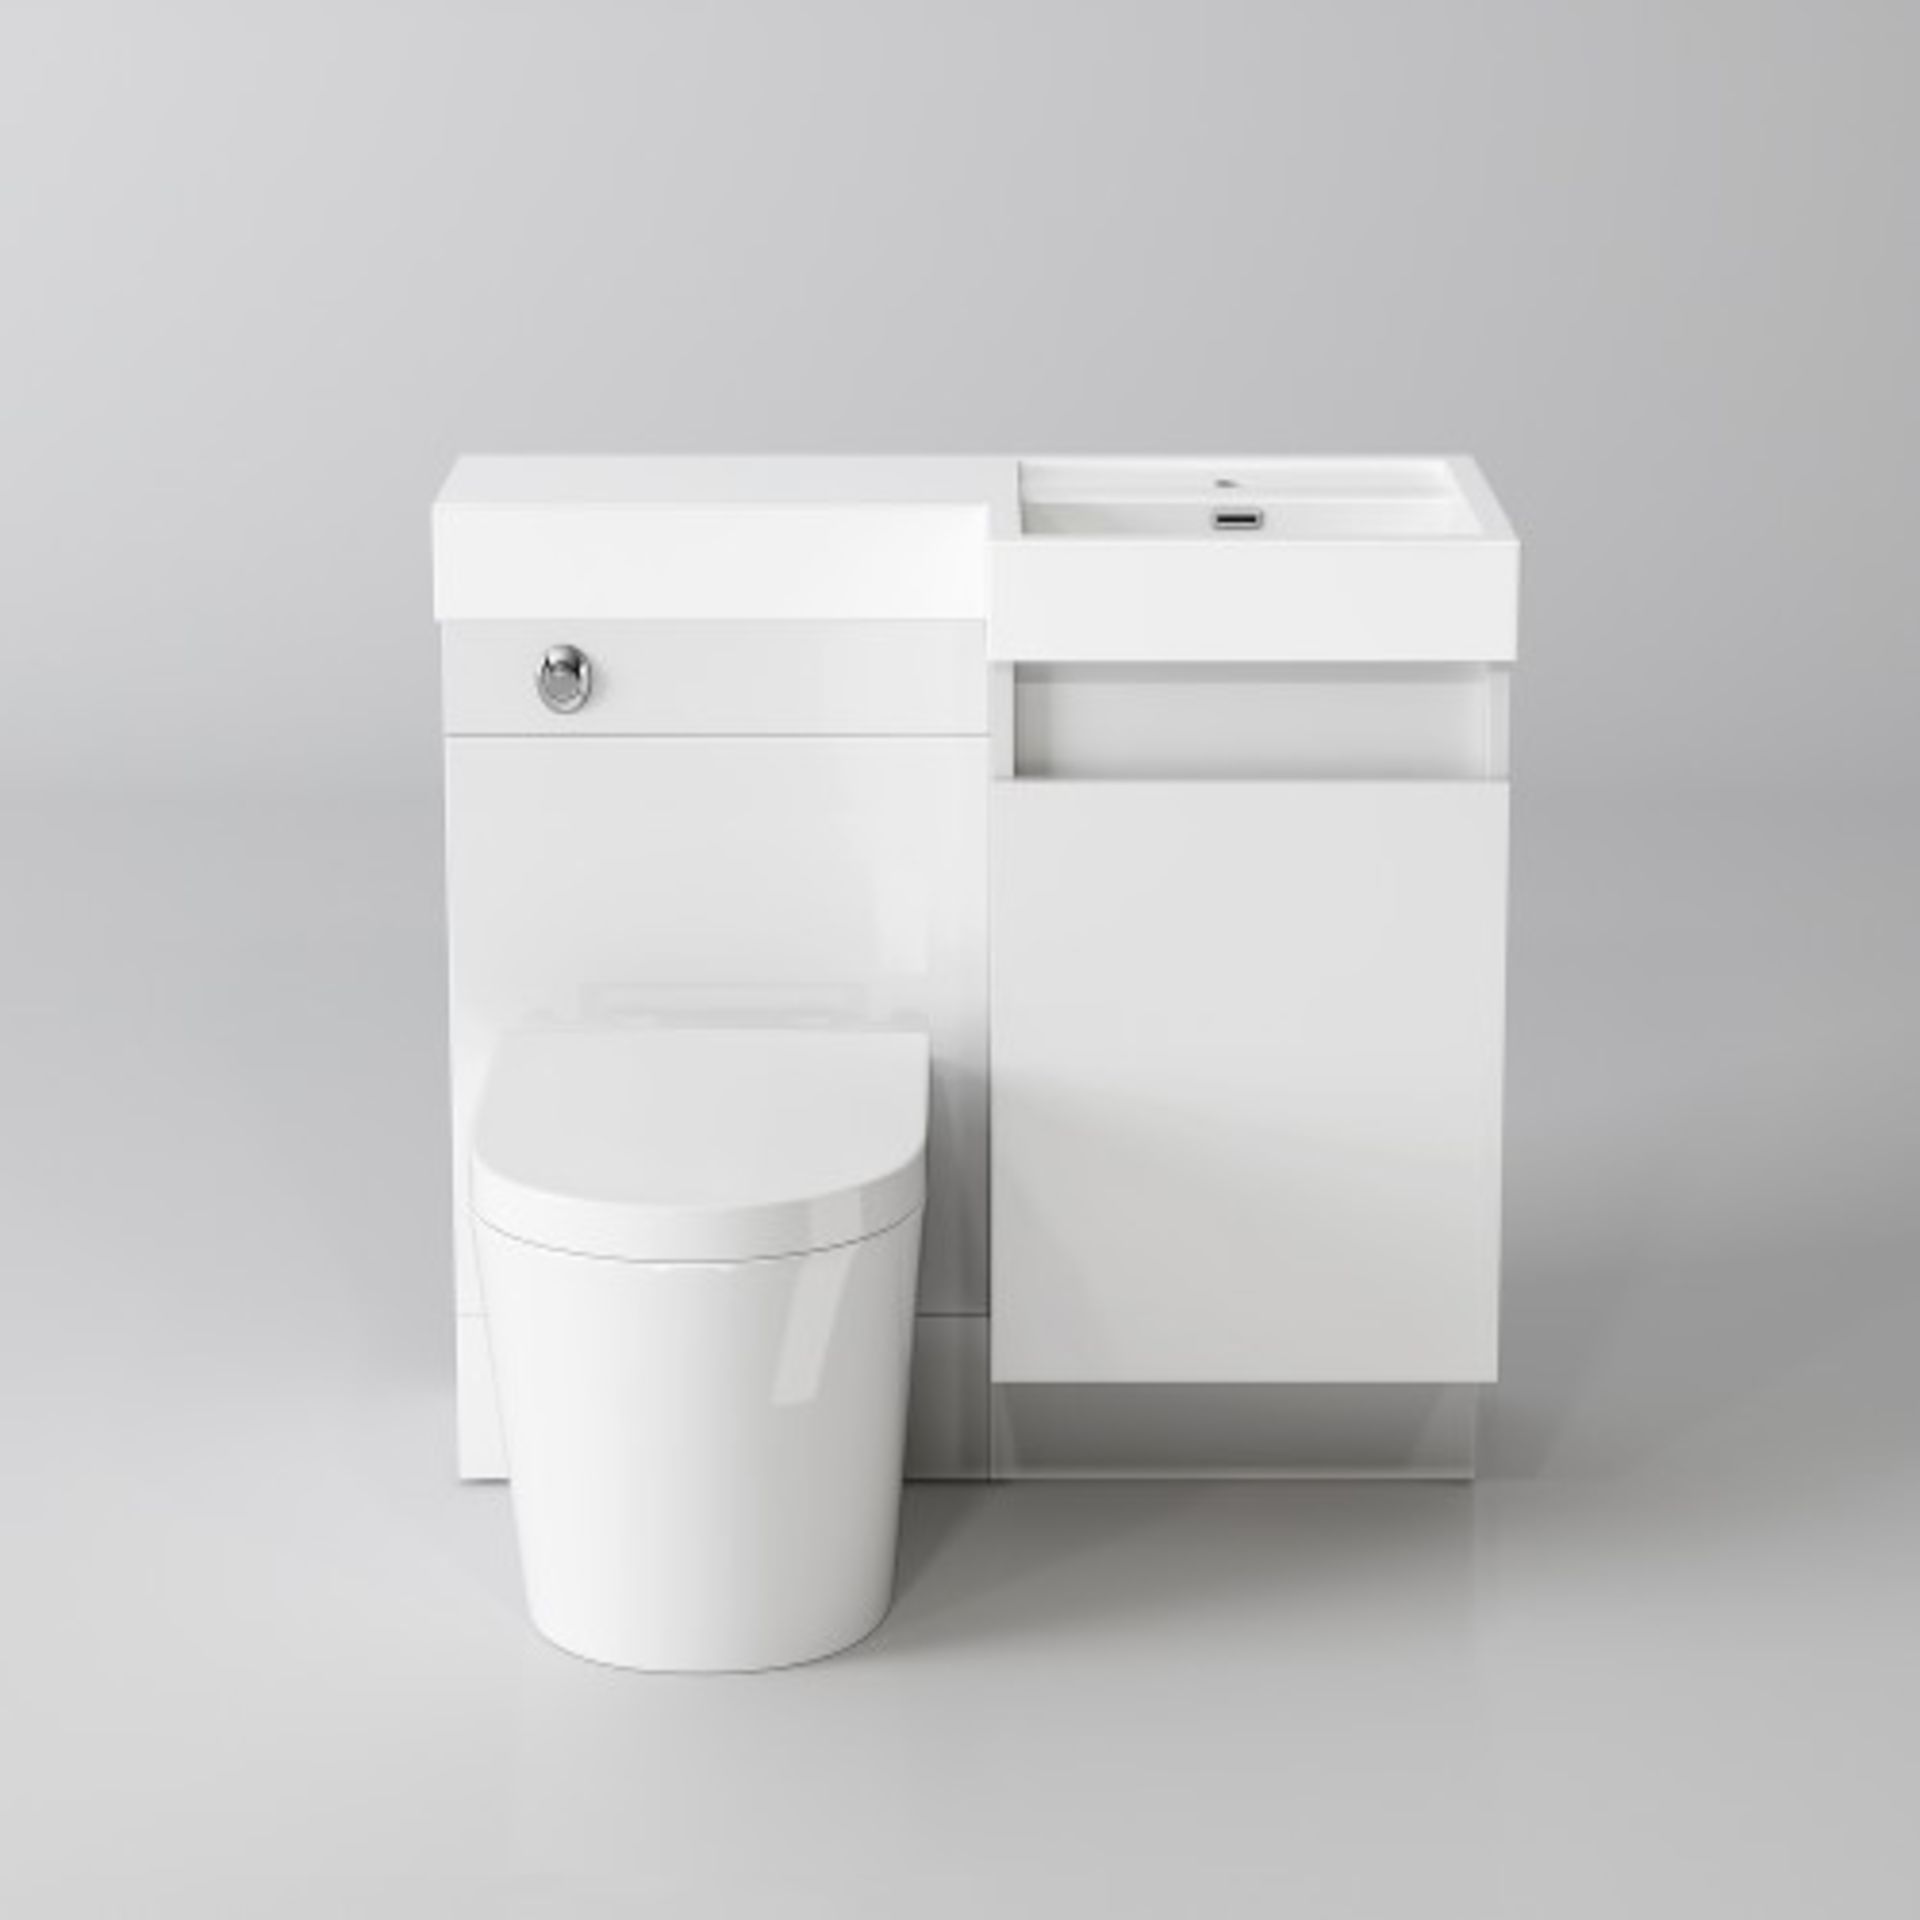 New & Boxed 906mm Olympia Gloss White Drawer Vanity Unit - Lyon Pan, Left Hand. Basin, Unit An... - Image 3 of 3